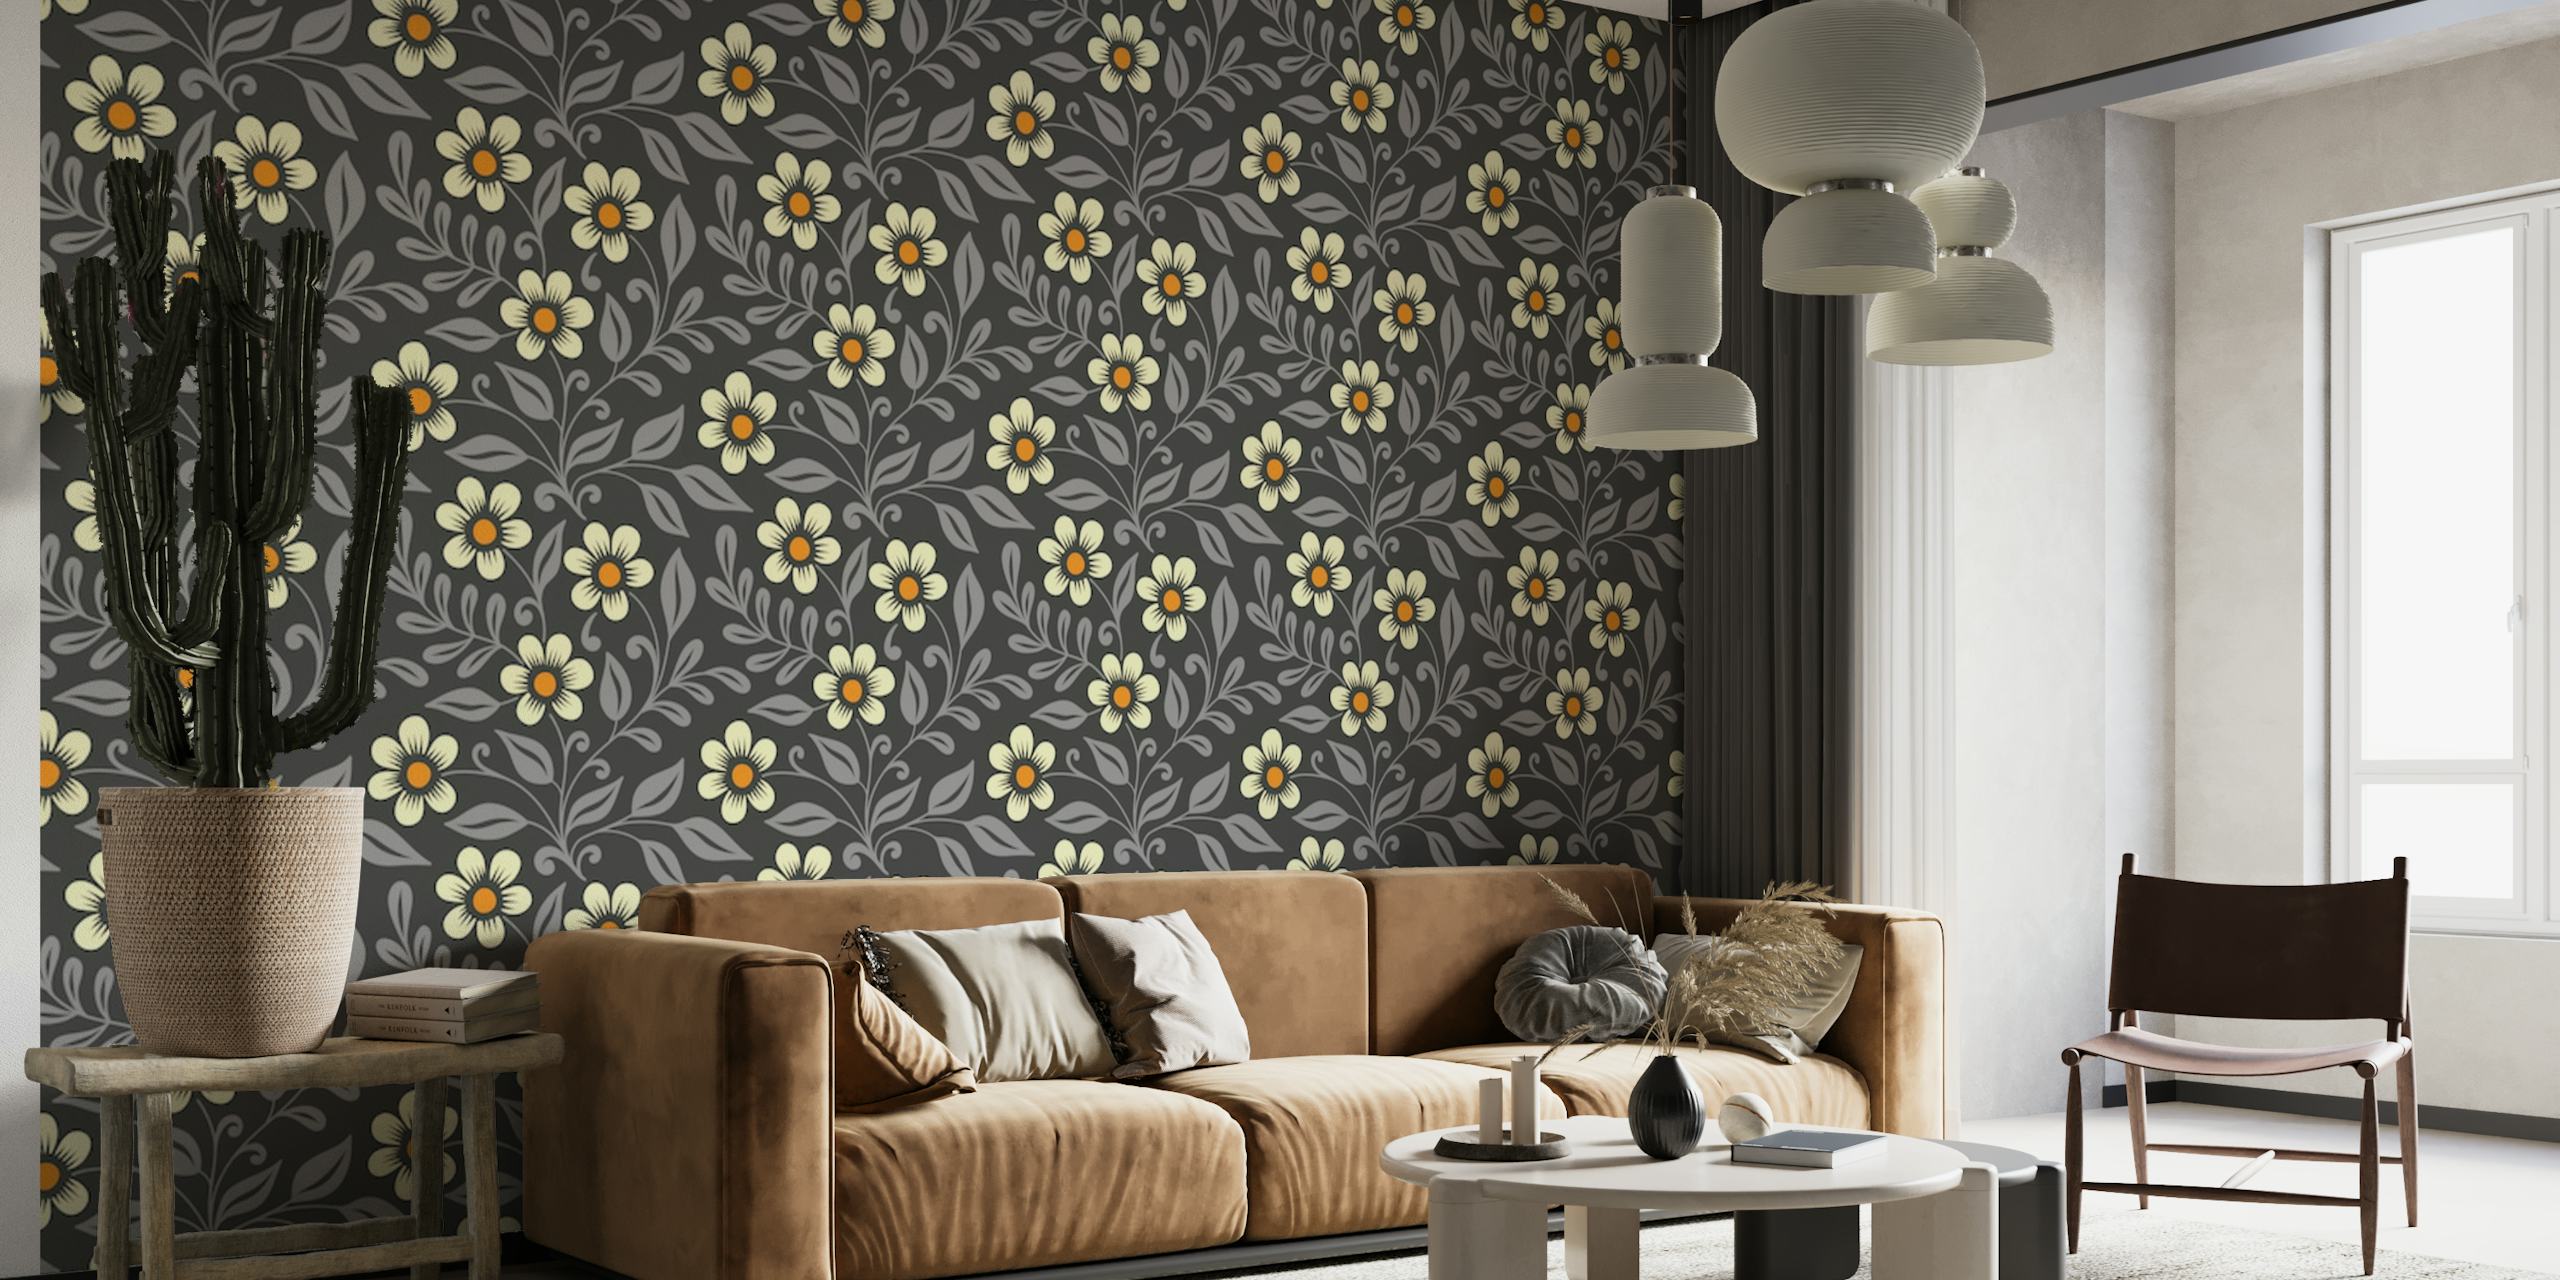 Charming ditsy floral pattern wall mural with small flowers on a grey background